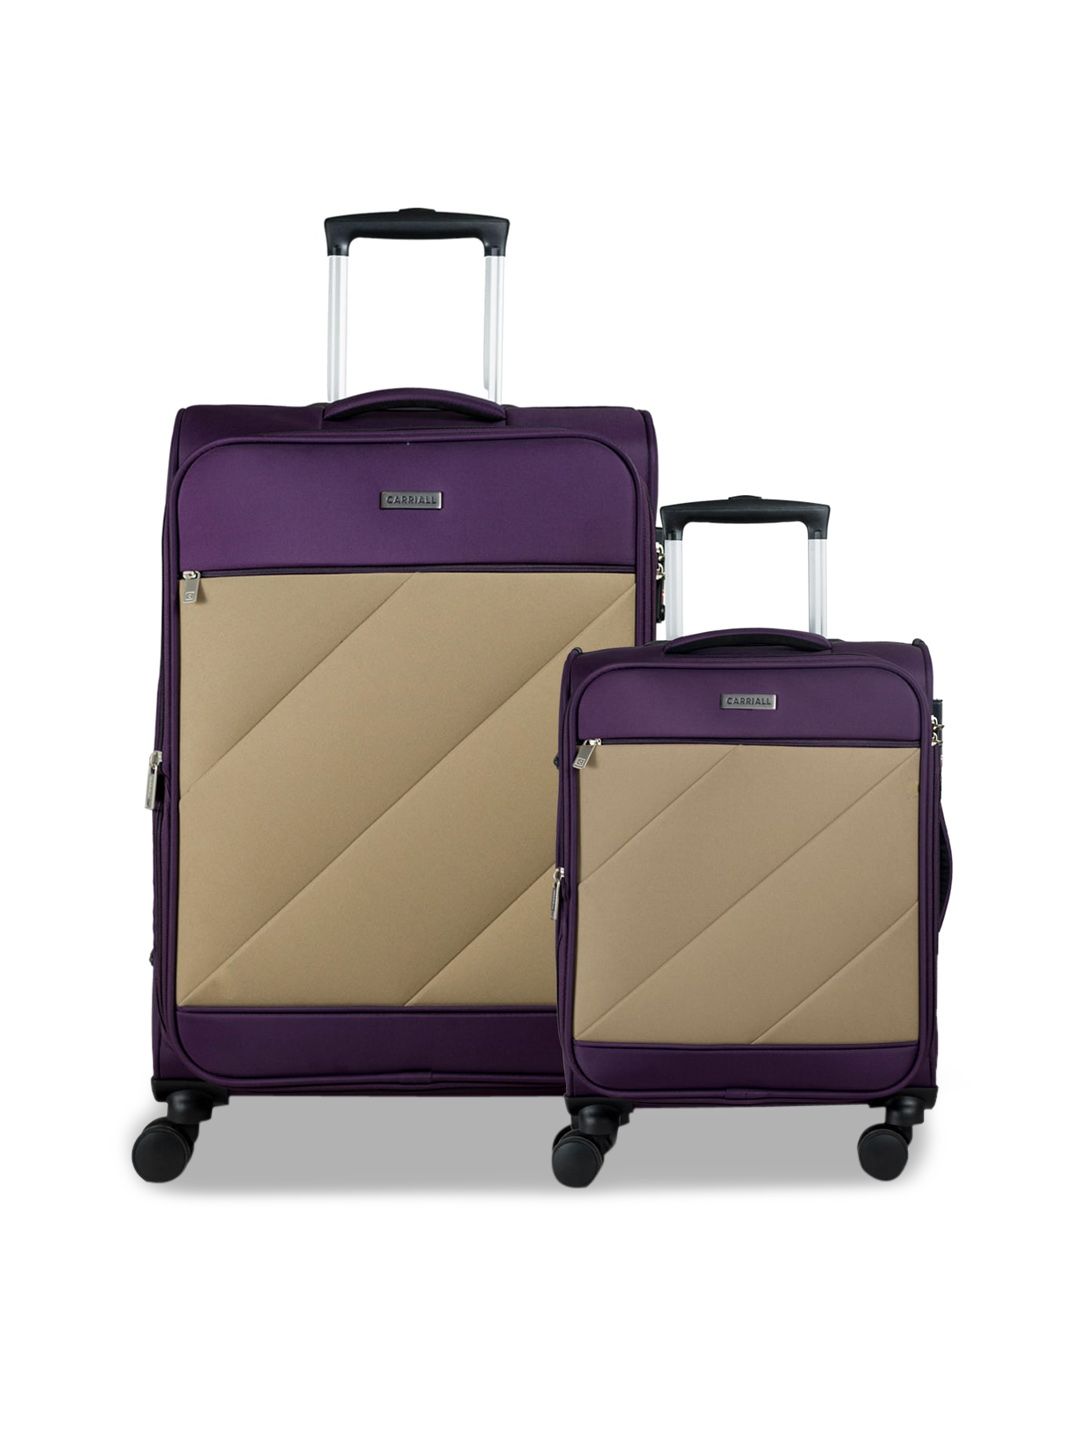 CARRIALL Set Of 2 Purple & Beige Colourblocked Soft-Sided Trolley Suitcases Price in India